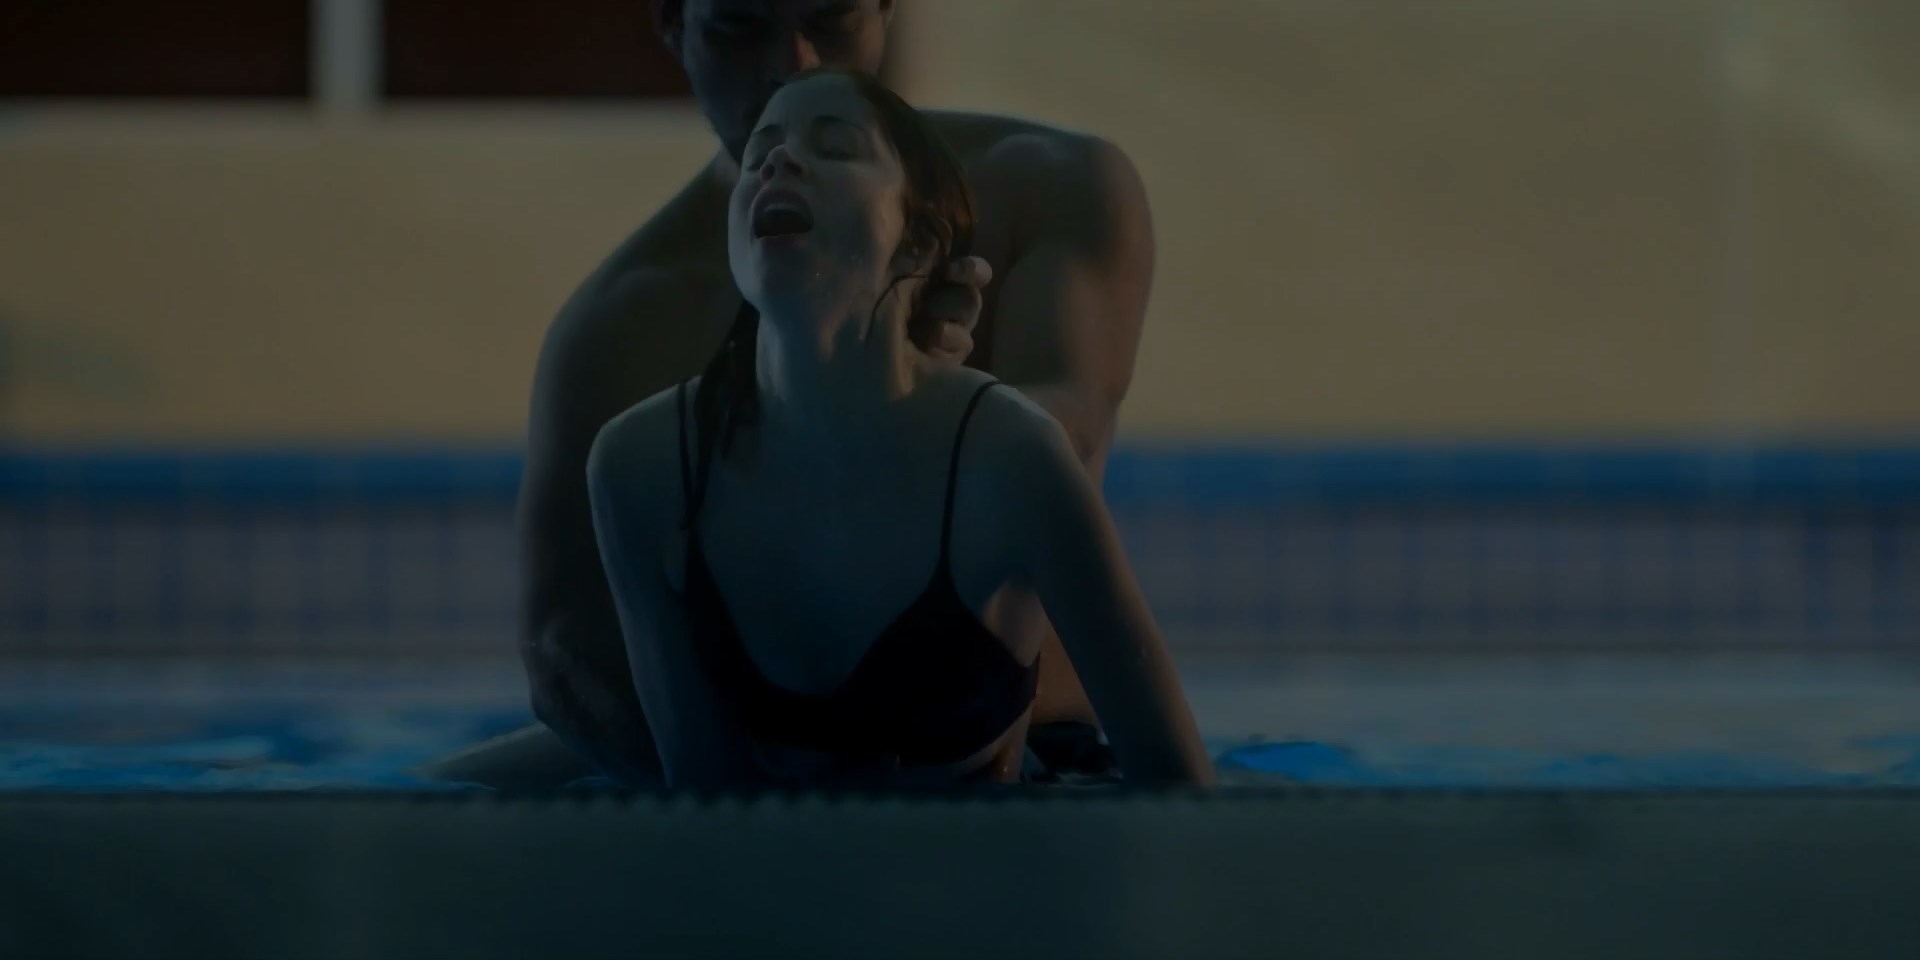 Charlotte hope nude porn picture | Nudeporn.org